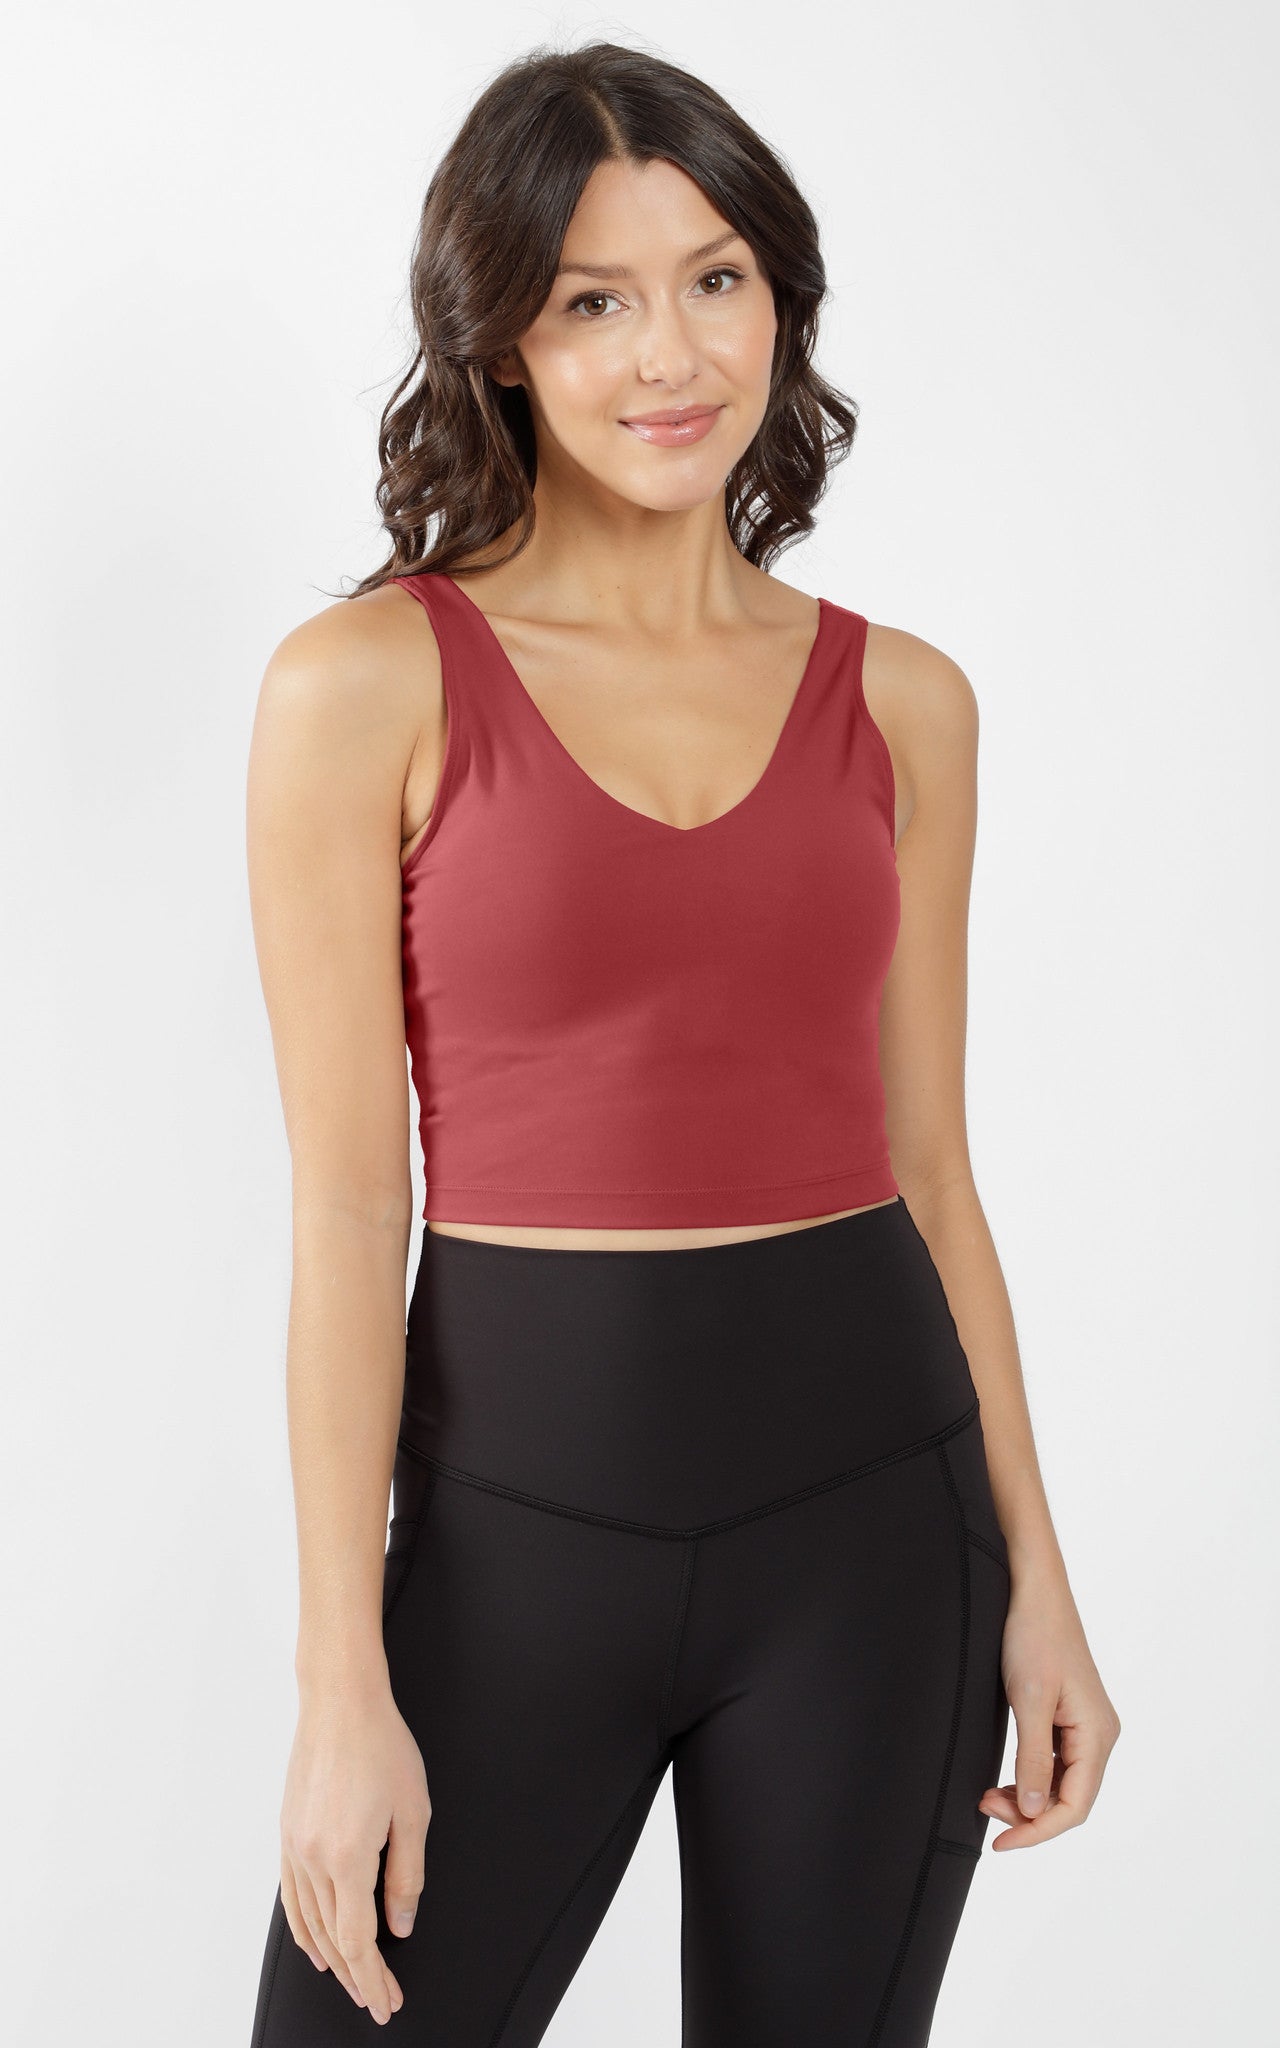 90 DEGREE BY REFLEX Tank Tops & Camisoles for Women